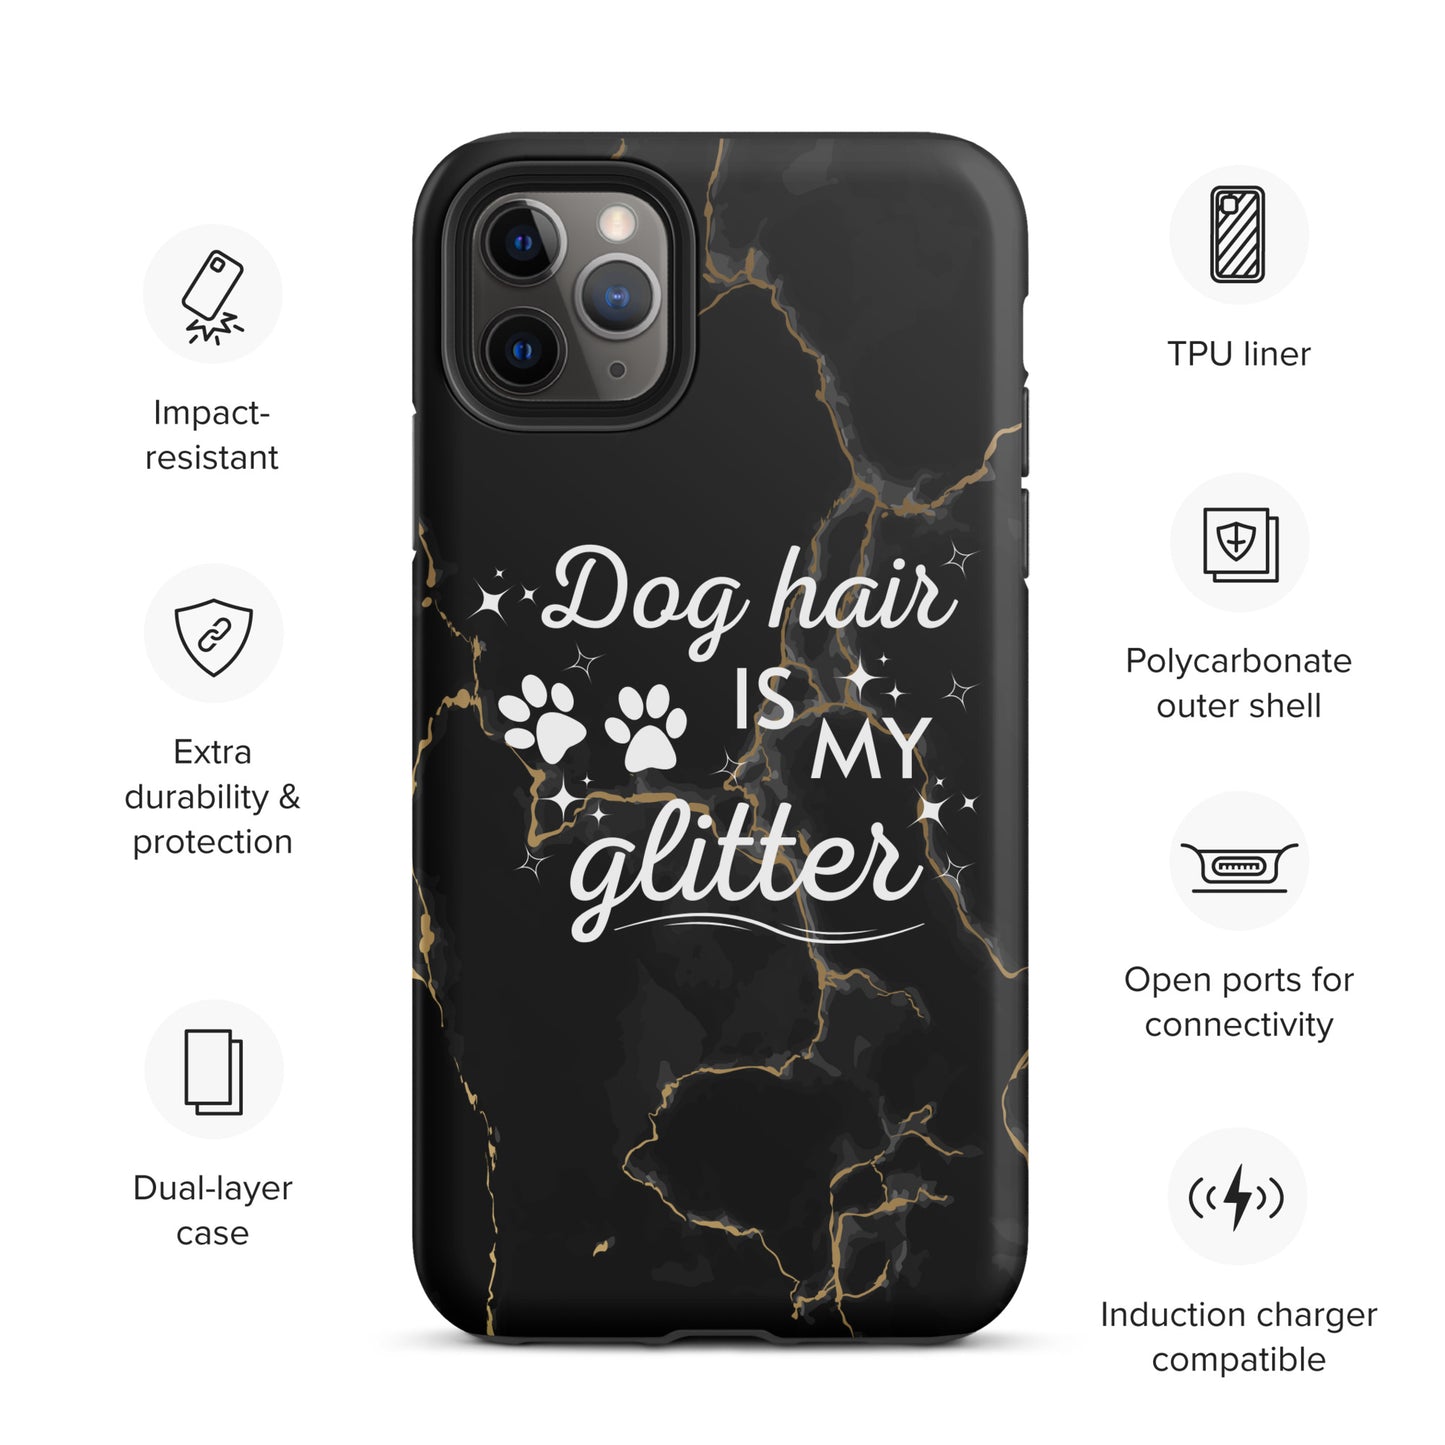 iPhone case 'Dog hair is my glitter'